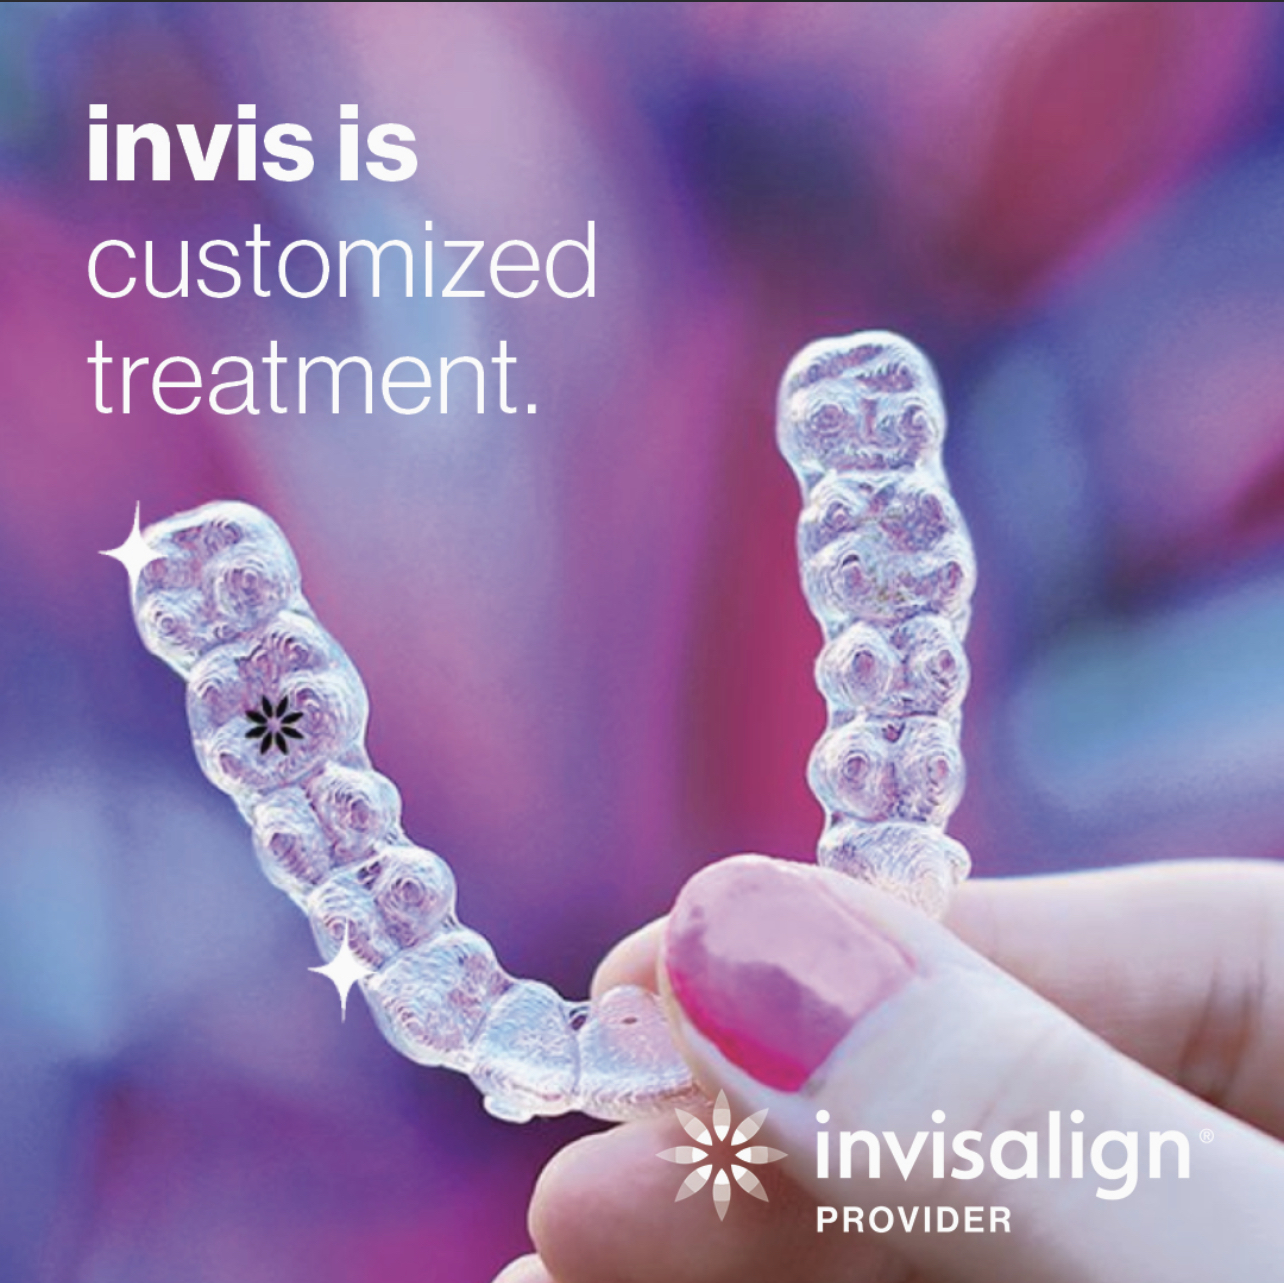 Invisalign Clear Dental Aligners Being Held - Trade Winds Dental